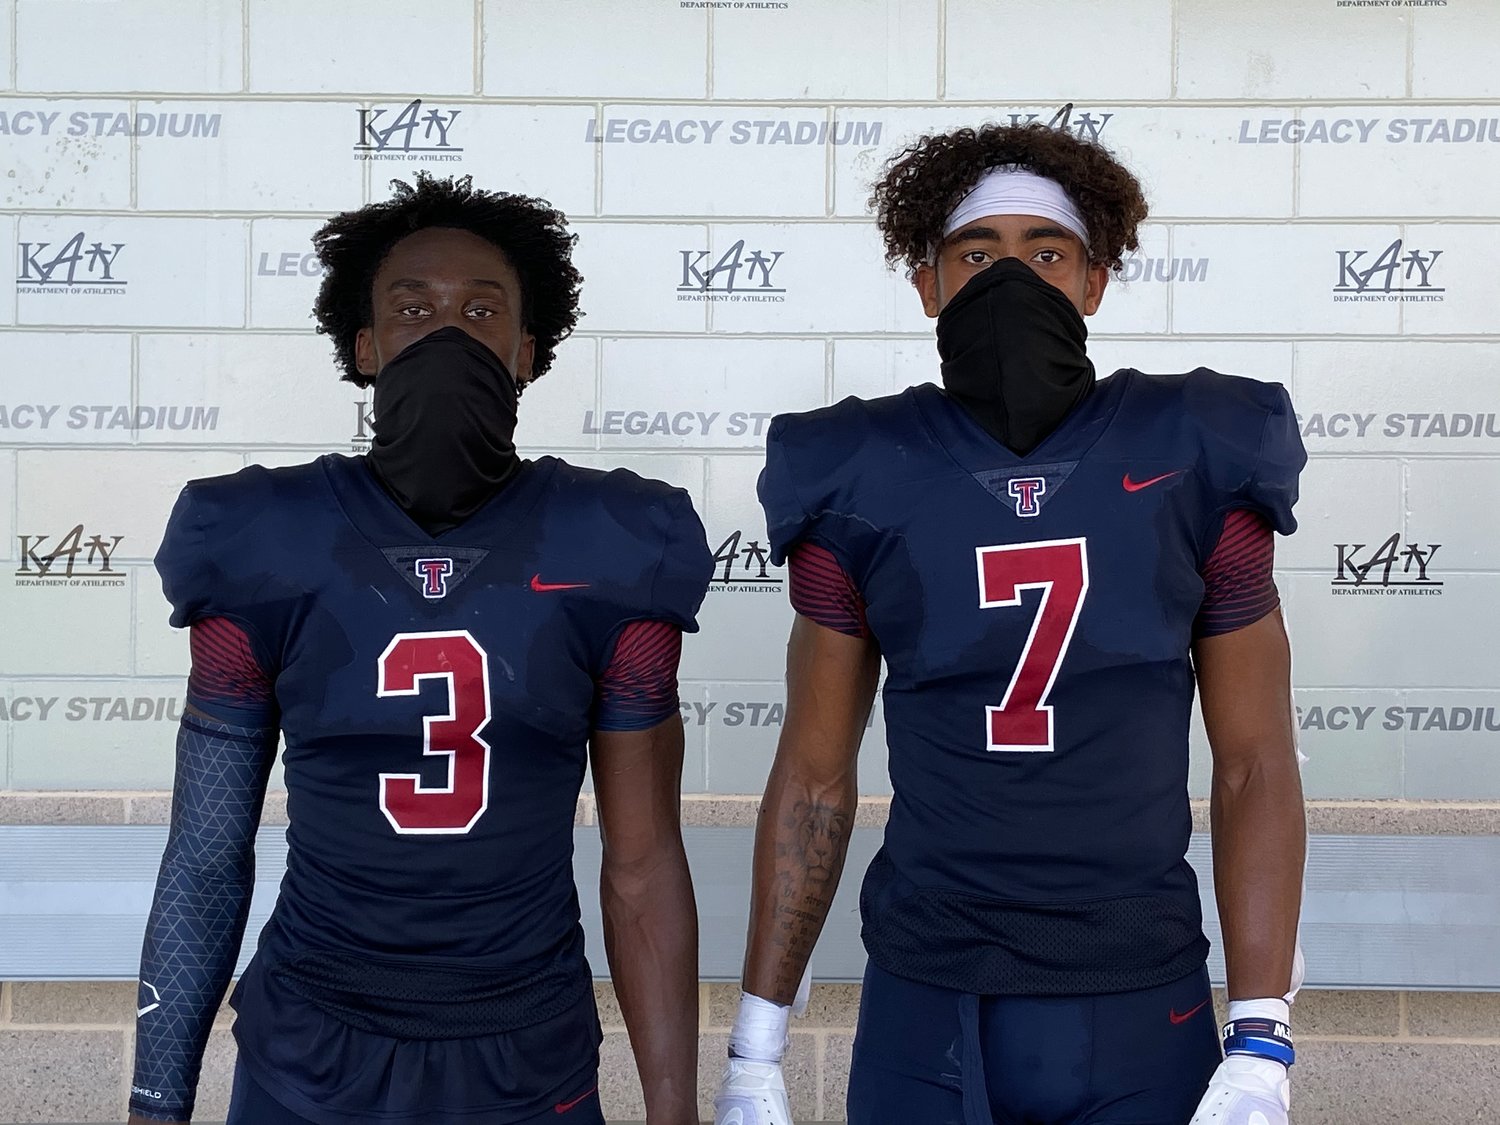 From left to right, Tompkins senior defensive back Temisan Alatan and senior defensive back Dru Polidore.